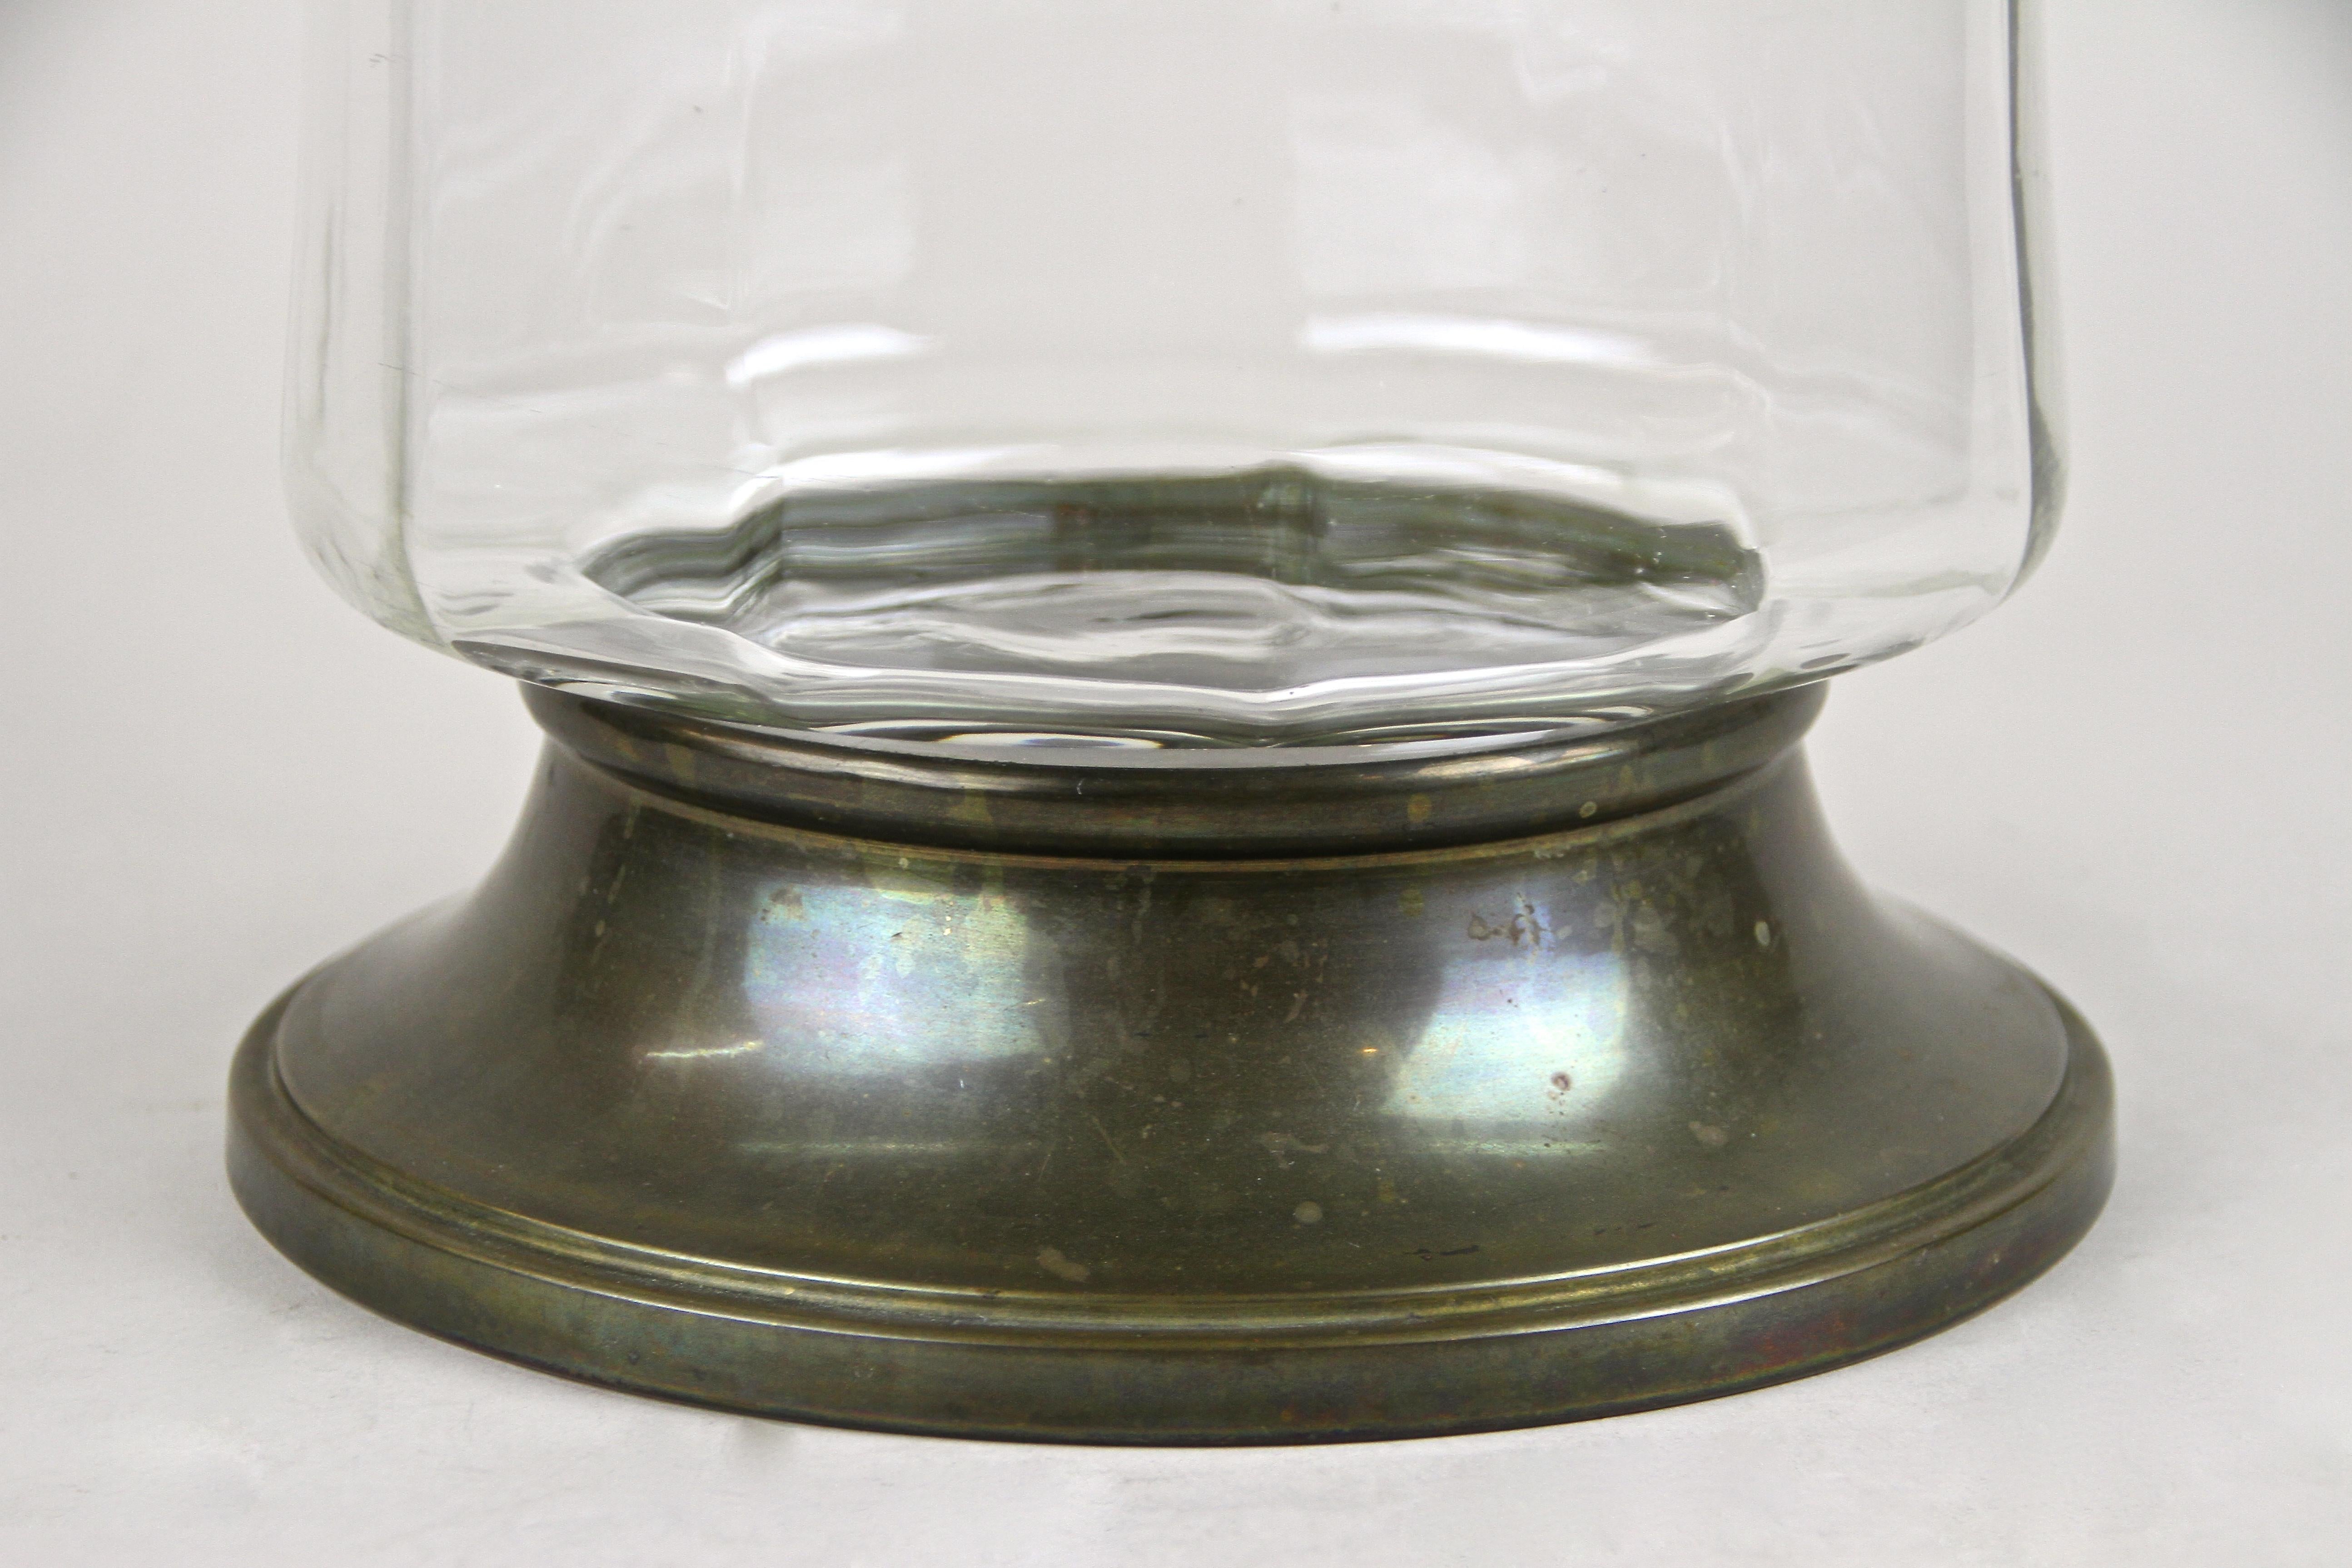 Lovely Art Nouveau candy glass jar from the early period in Vienna, circa 1910. This early 20th century large Austrian glass box was part of an old Austrian candy shop and impresses with an artfully shaped, slightly twisted glass body embedded into